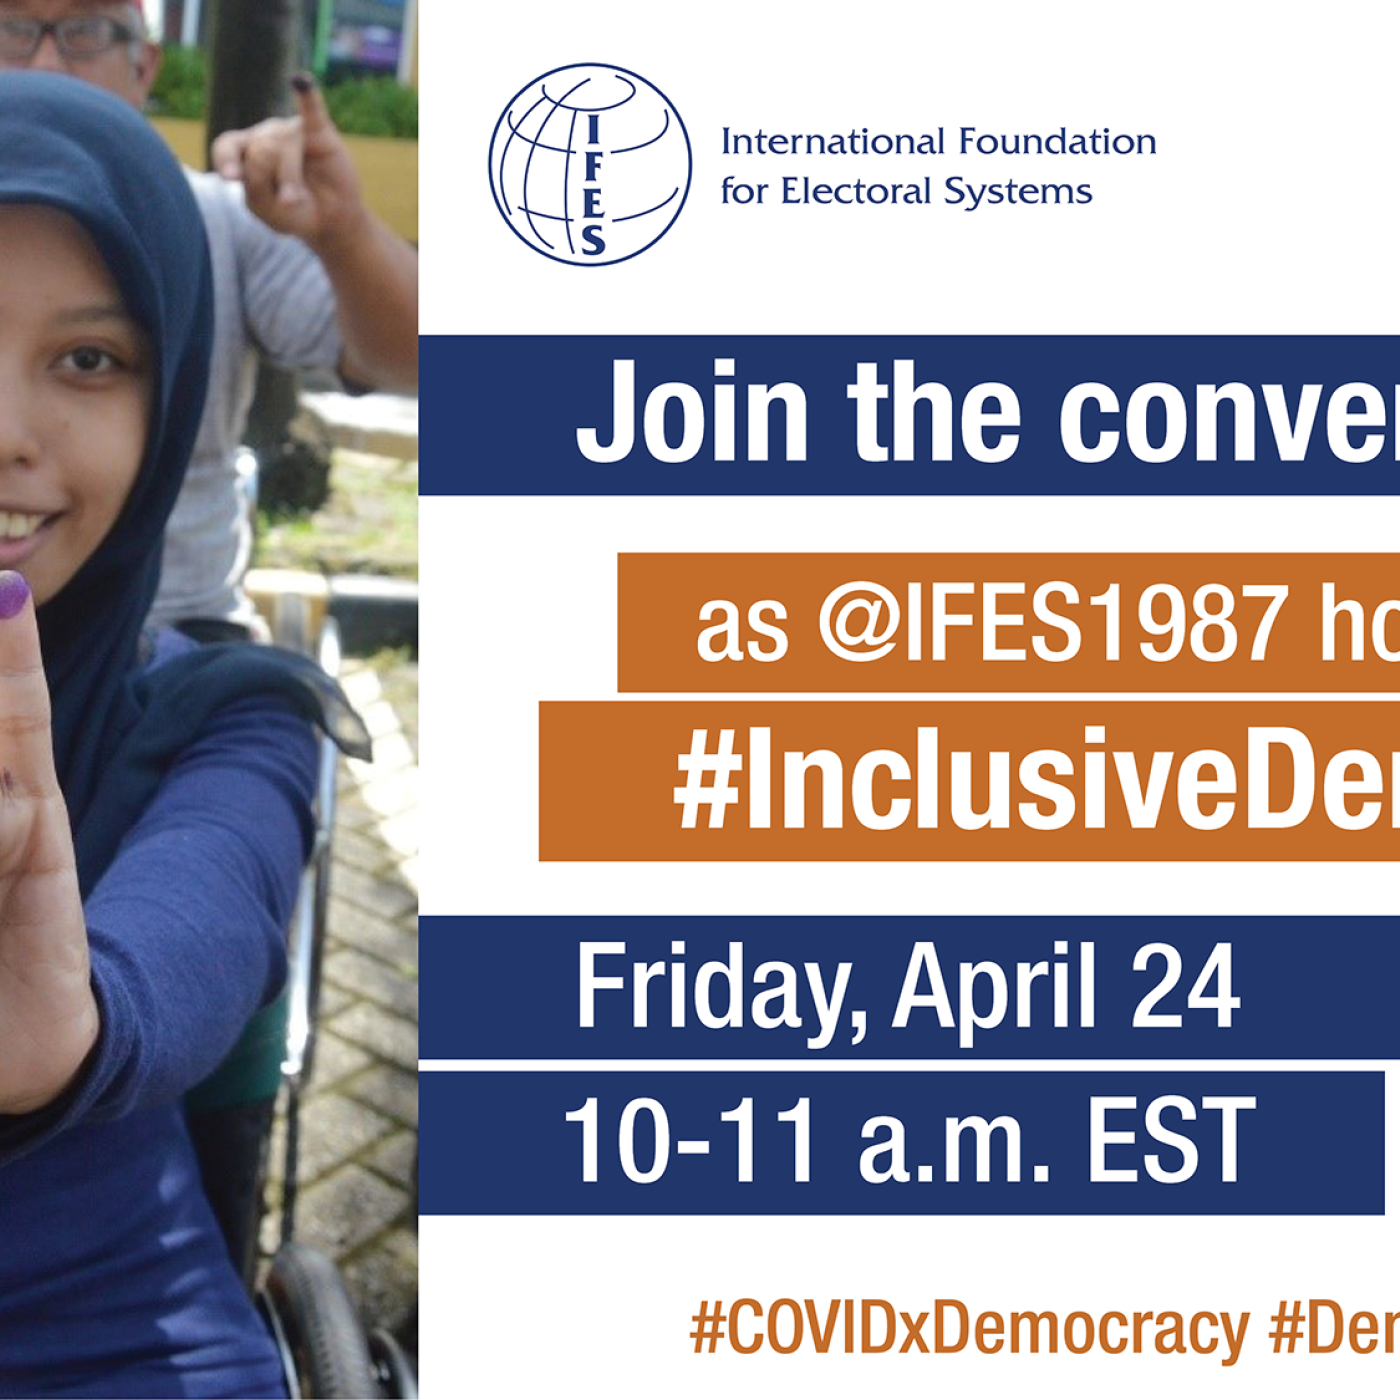 Join the conversation as @IFES1987 hosts an @InclusiveDemTalk | Friday, April 24 10-11 a.m. EST | #COVIDxDemocracy #DemocracyIs